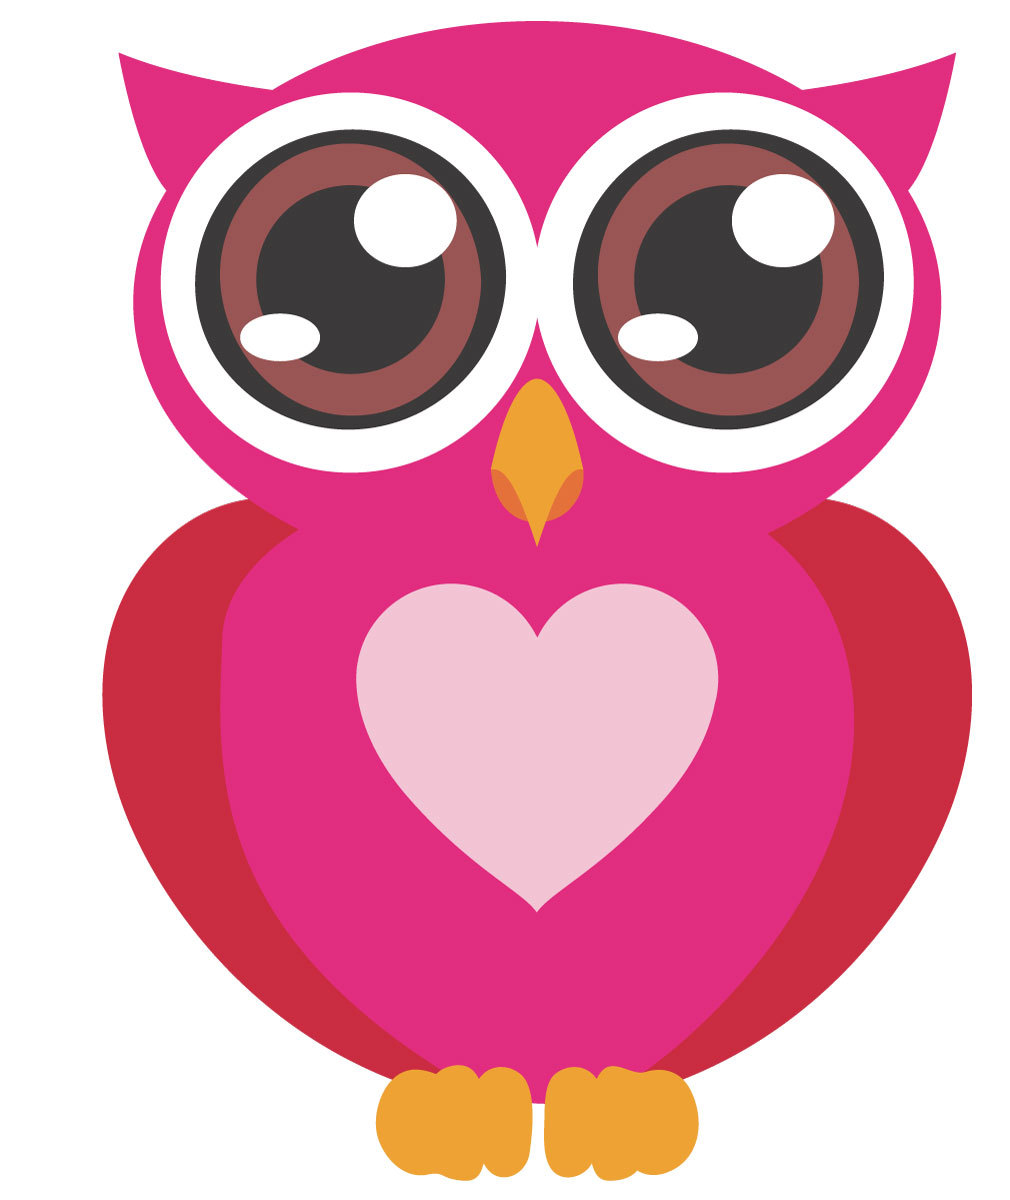 Pink Baby Owl Clipart | Clipart Panda - Free Clipart Images